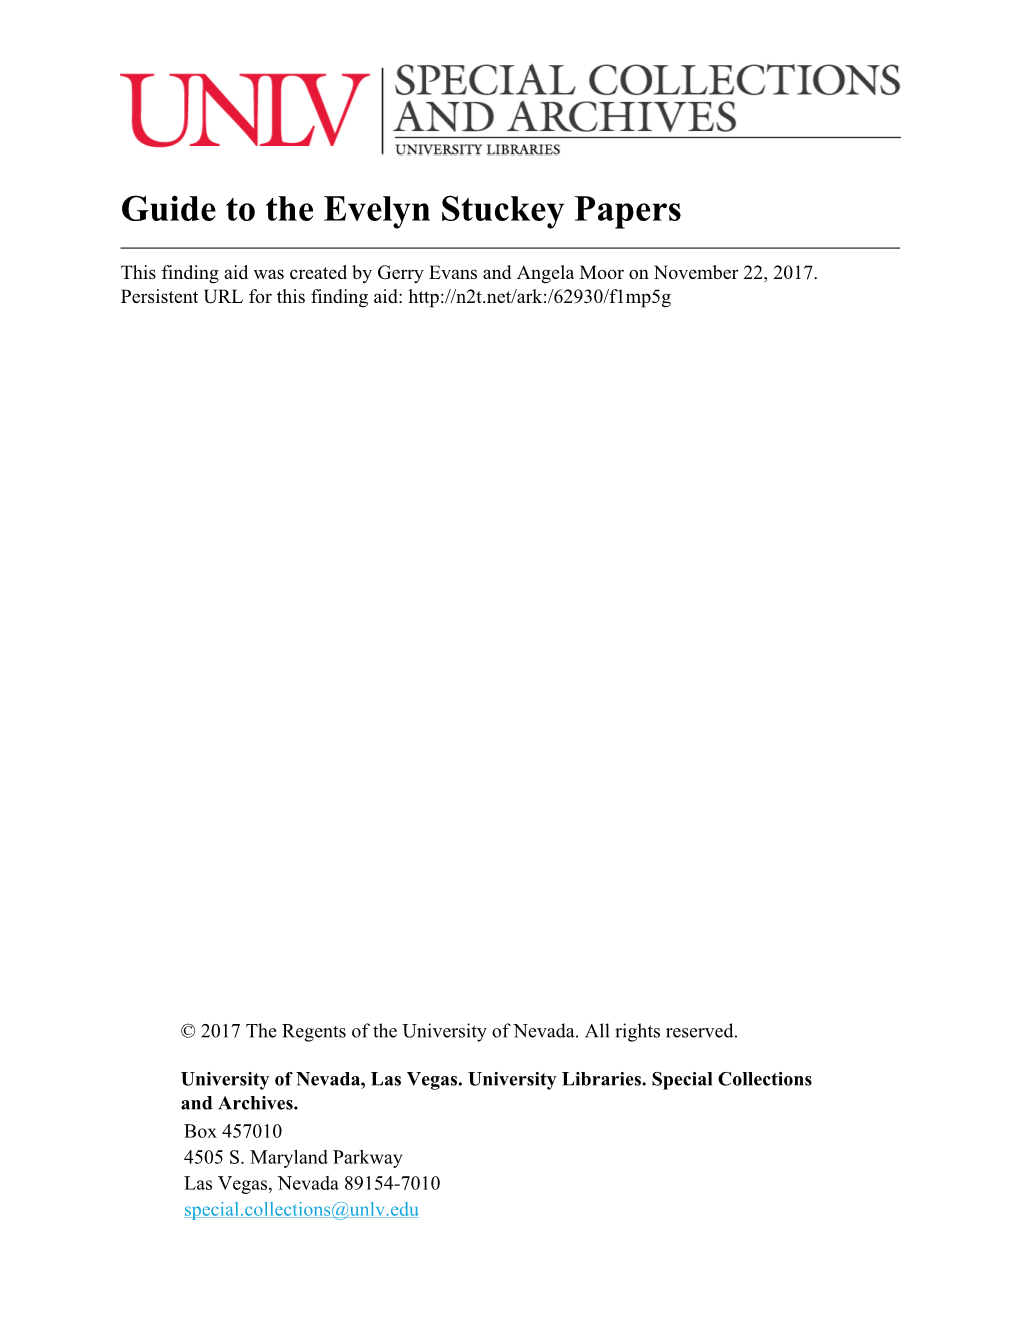 Guide to the Evelyn Stuckey Papers